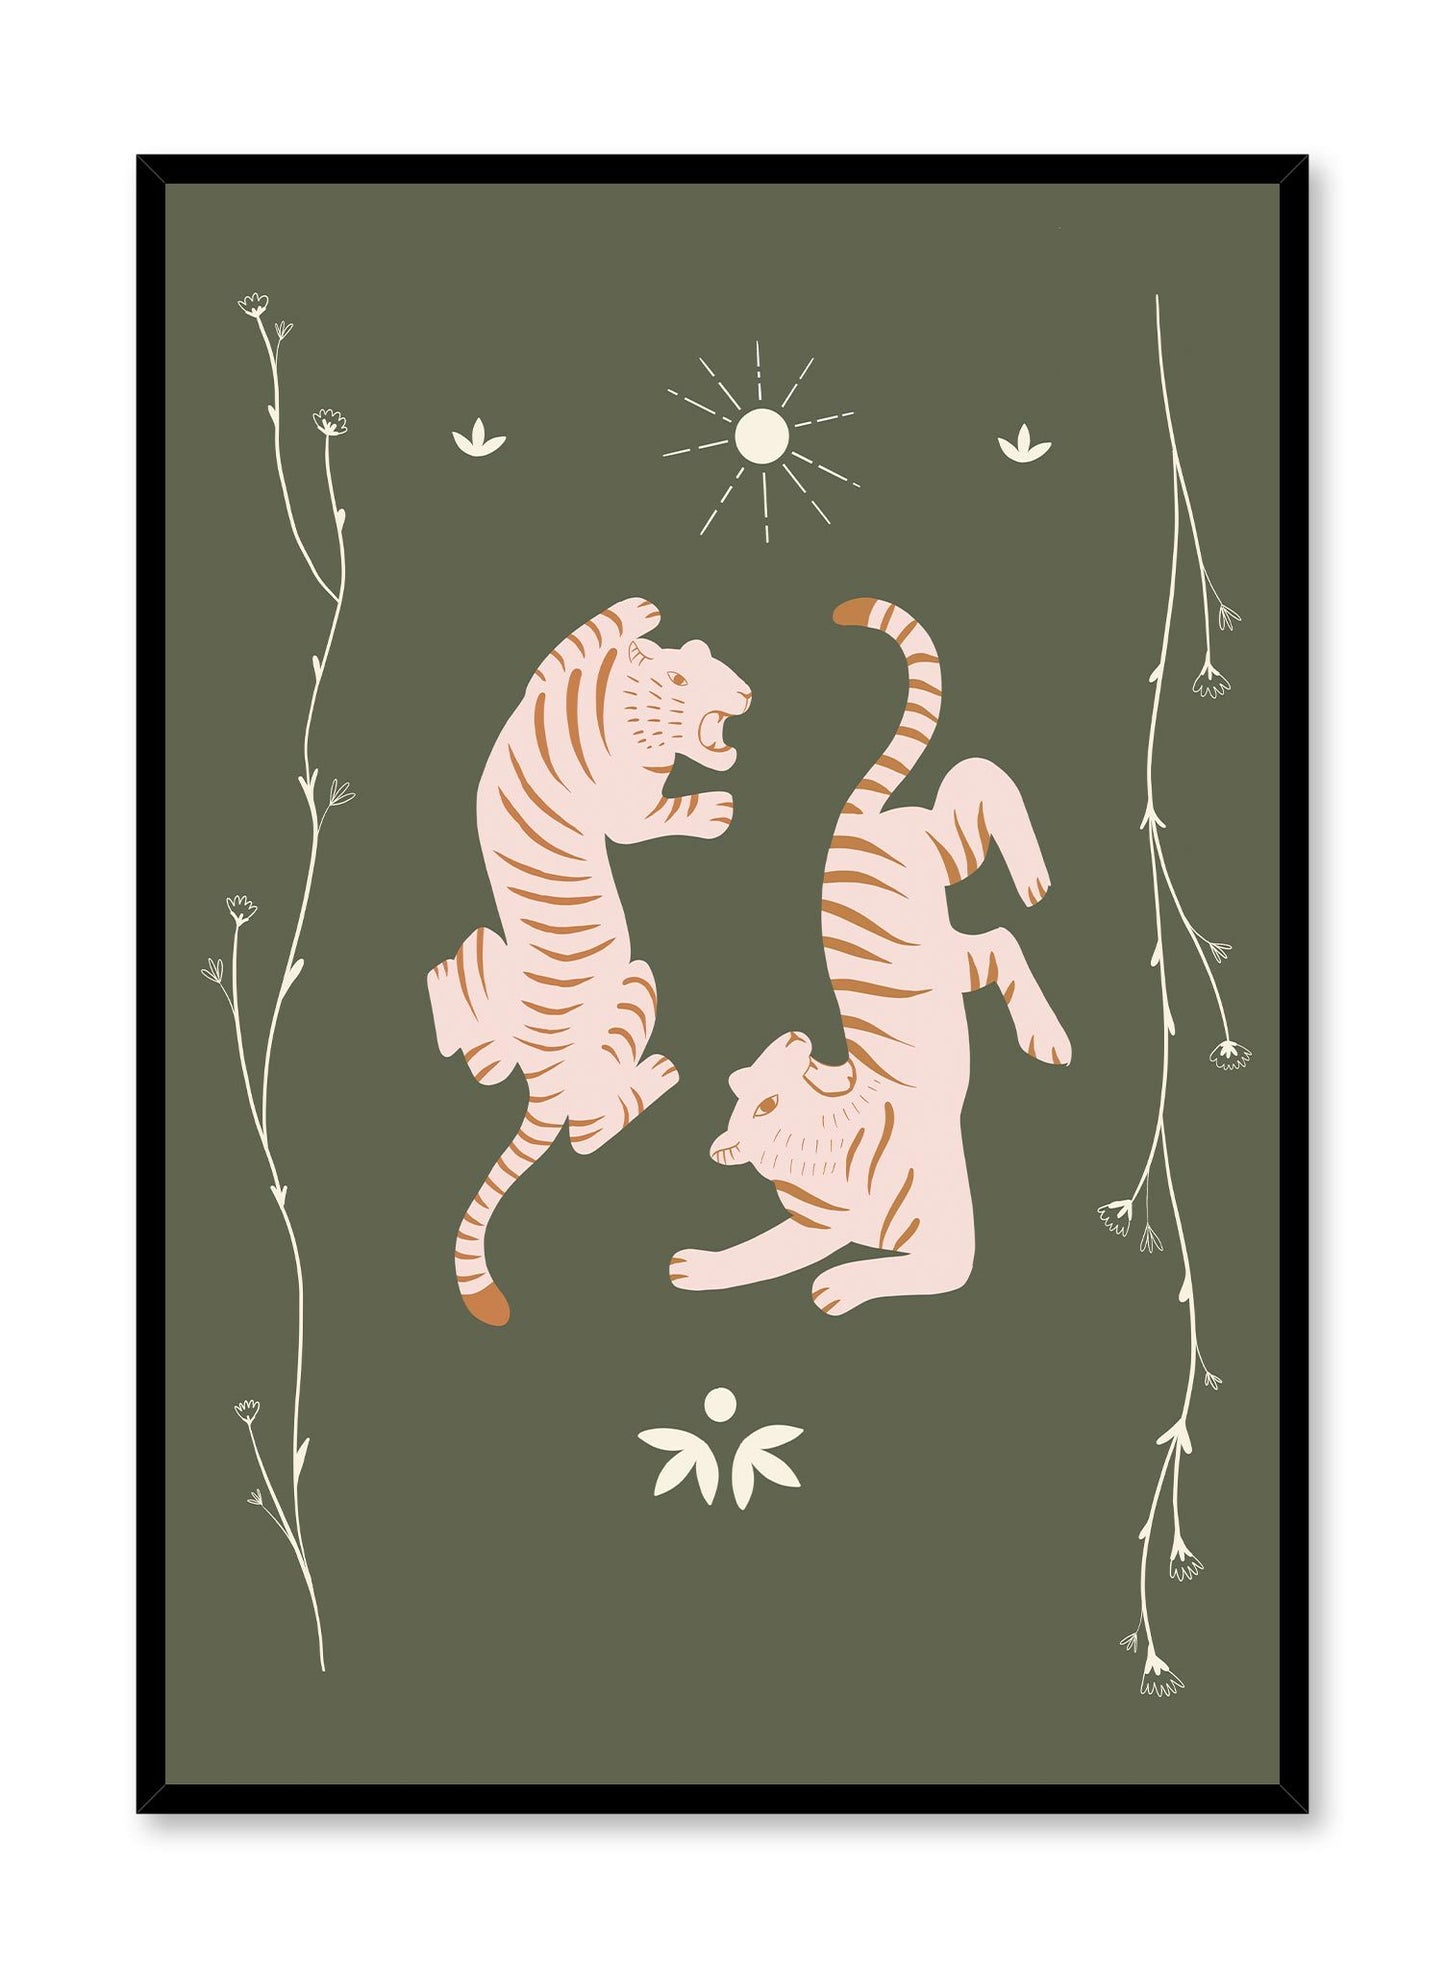 Tiger Team is a minimalist illustration of a pair of pink tiger twins with orange stripes standing in opposite direction roaring to show their dominance by Opposite Wall.